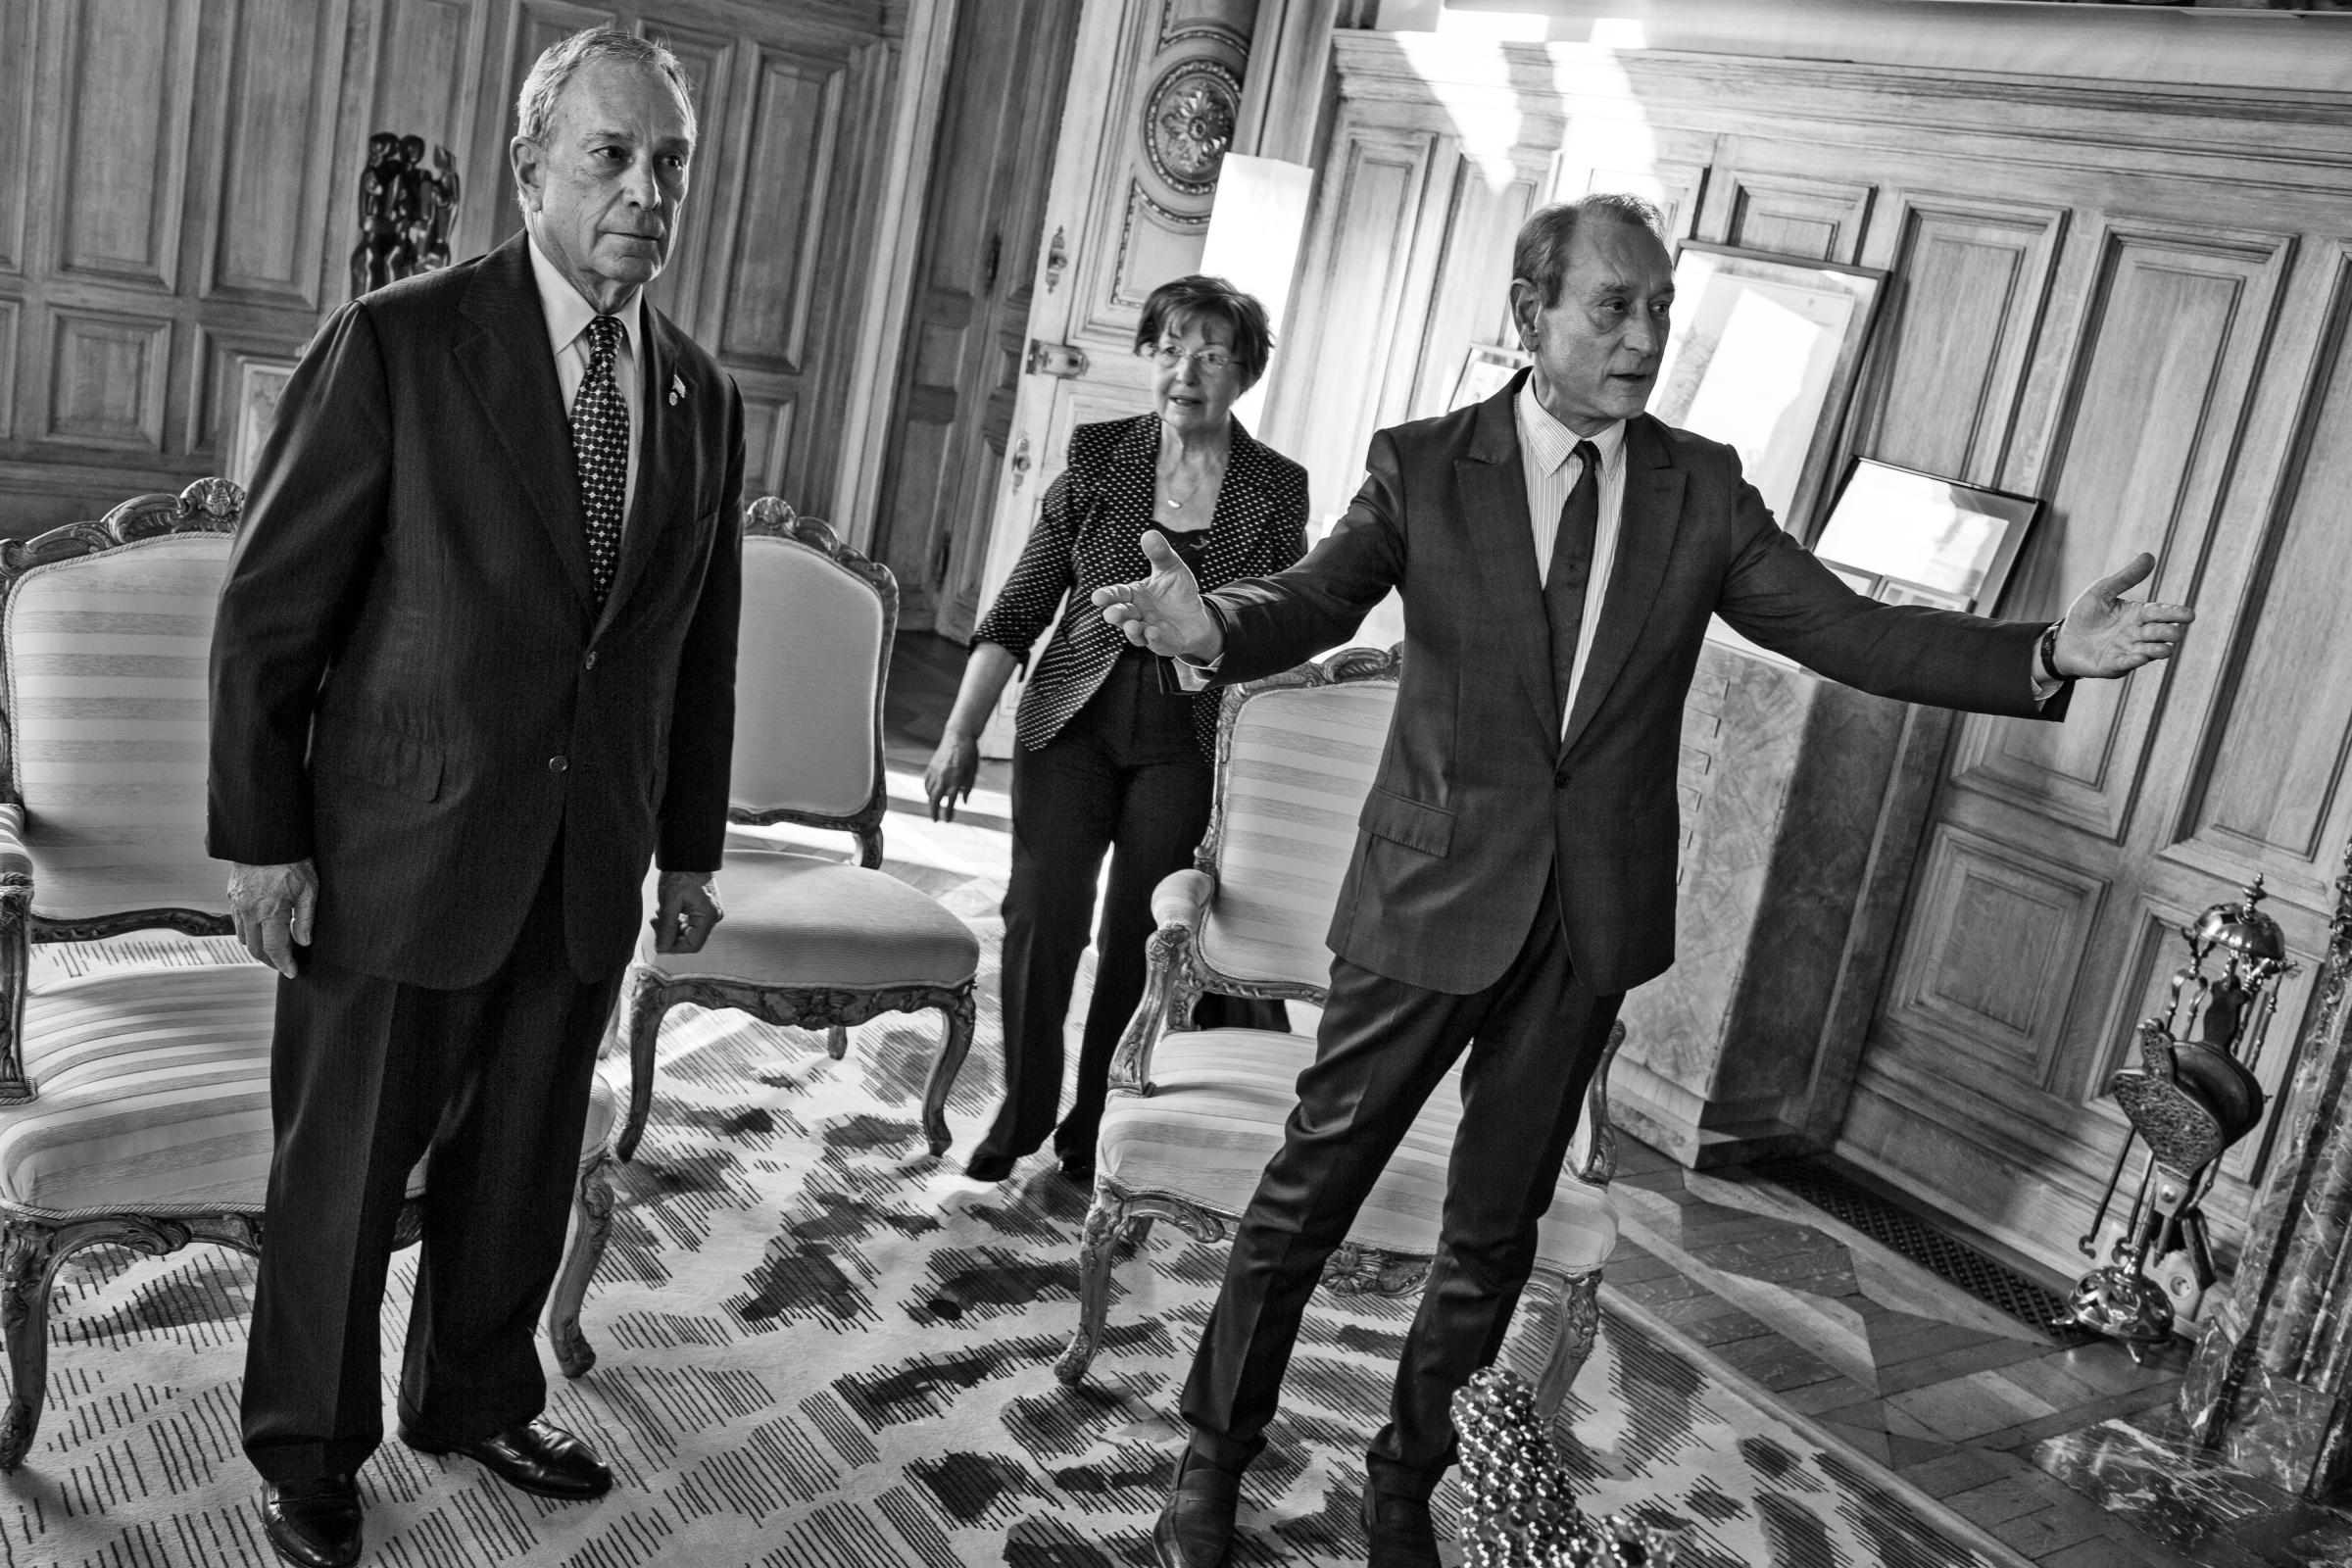 Paris, France - SEPTEMBER 23: Behind the scenes with New York Mayor Michael Bloomberg on the 23rd September 2013 in Paris, France.  Here Mayor Bloomberg meets with Paris Mayor, Bertrand Delanoe at the mayor's office at the 'Hotel de Ville' in Paris. (Photos by Charles Ommanney/ Reportage by Getty Images)